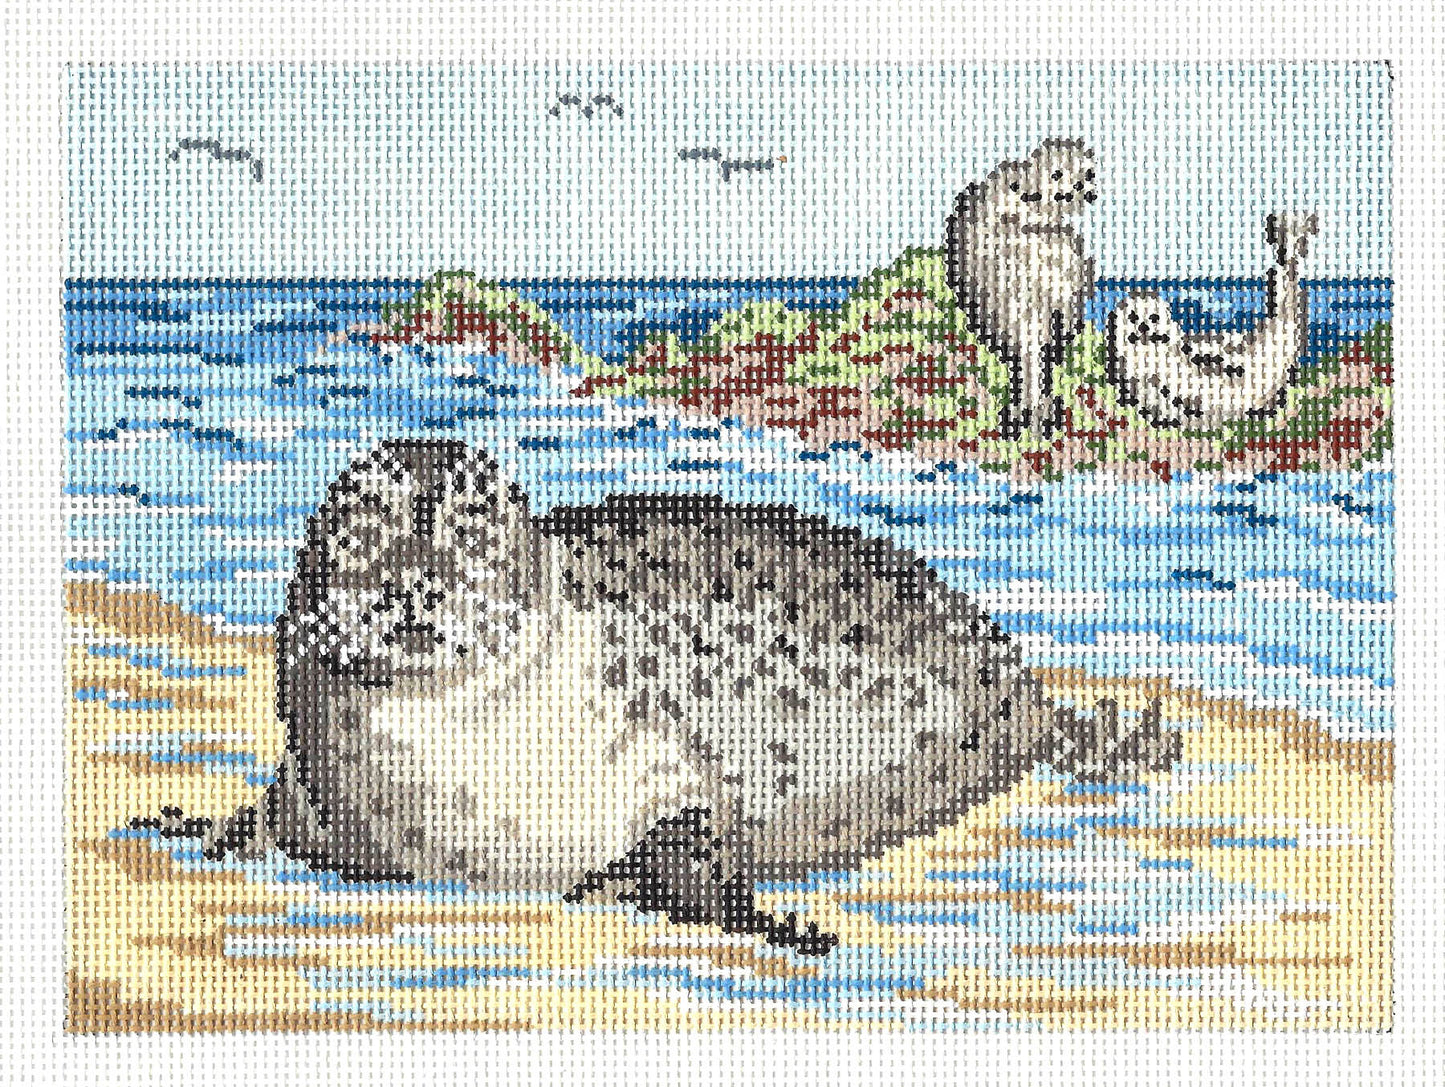 Canvas ~ Seals on the Beach handpainted 18 mesh Needlepoint Canvas by Needle Crossings